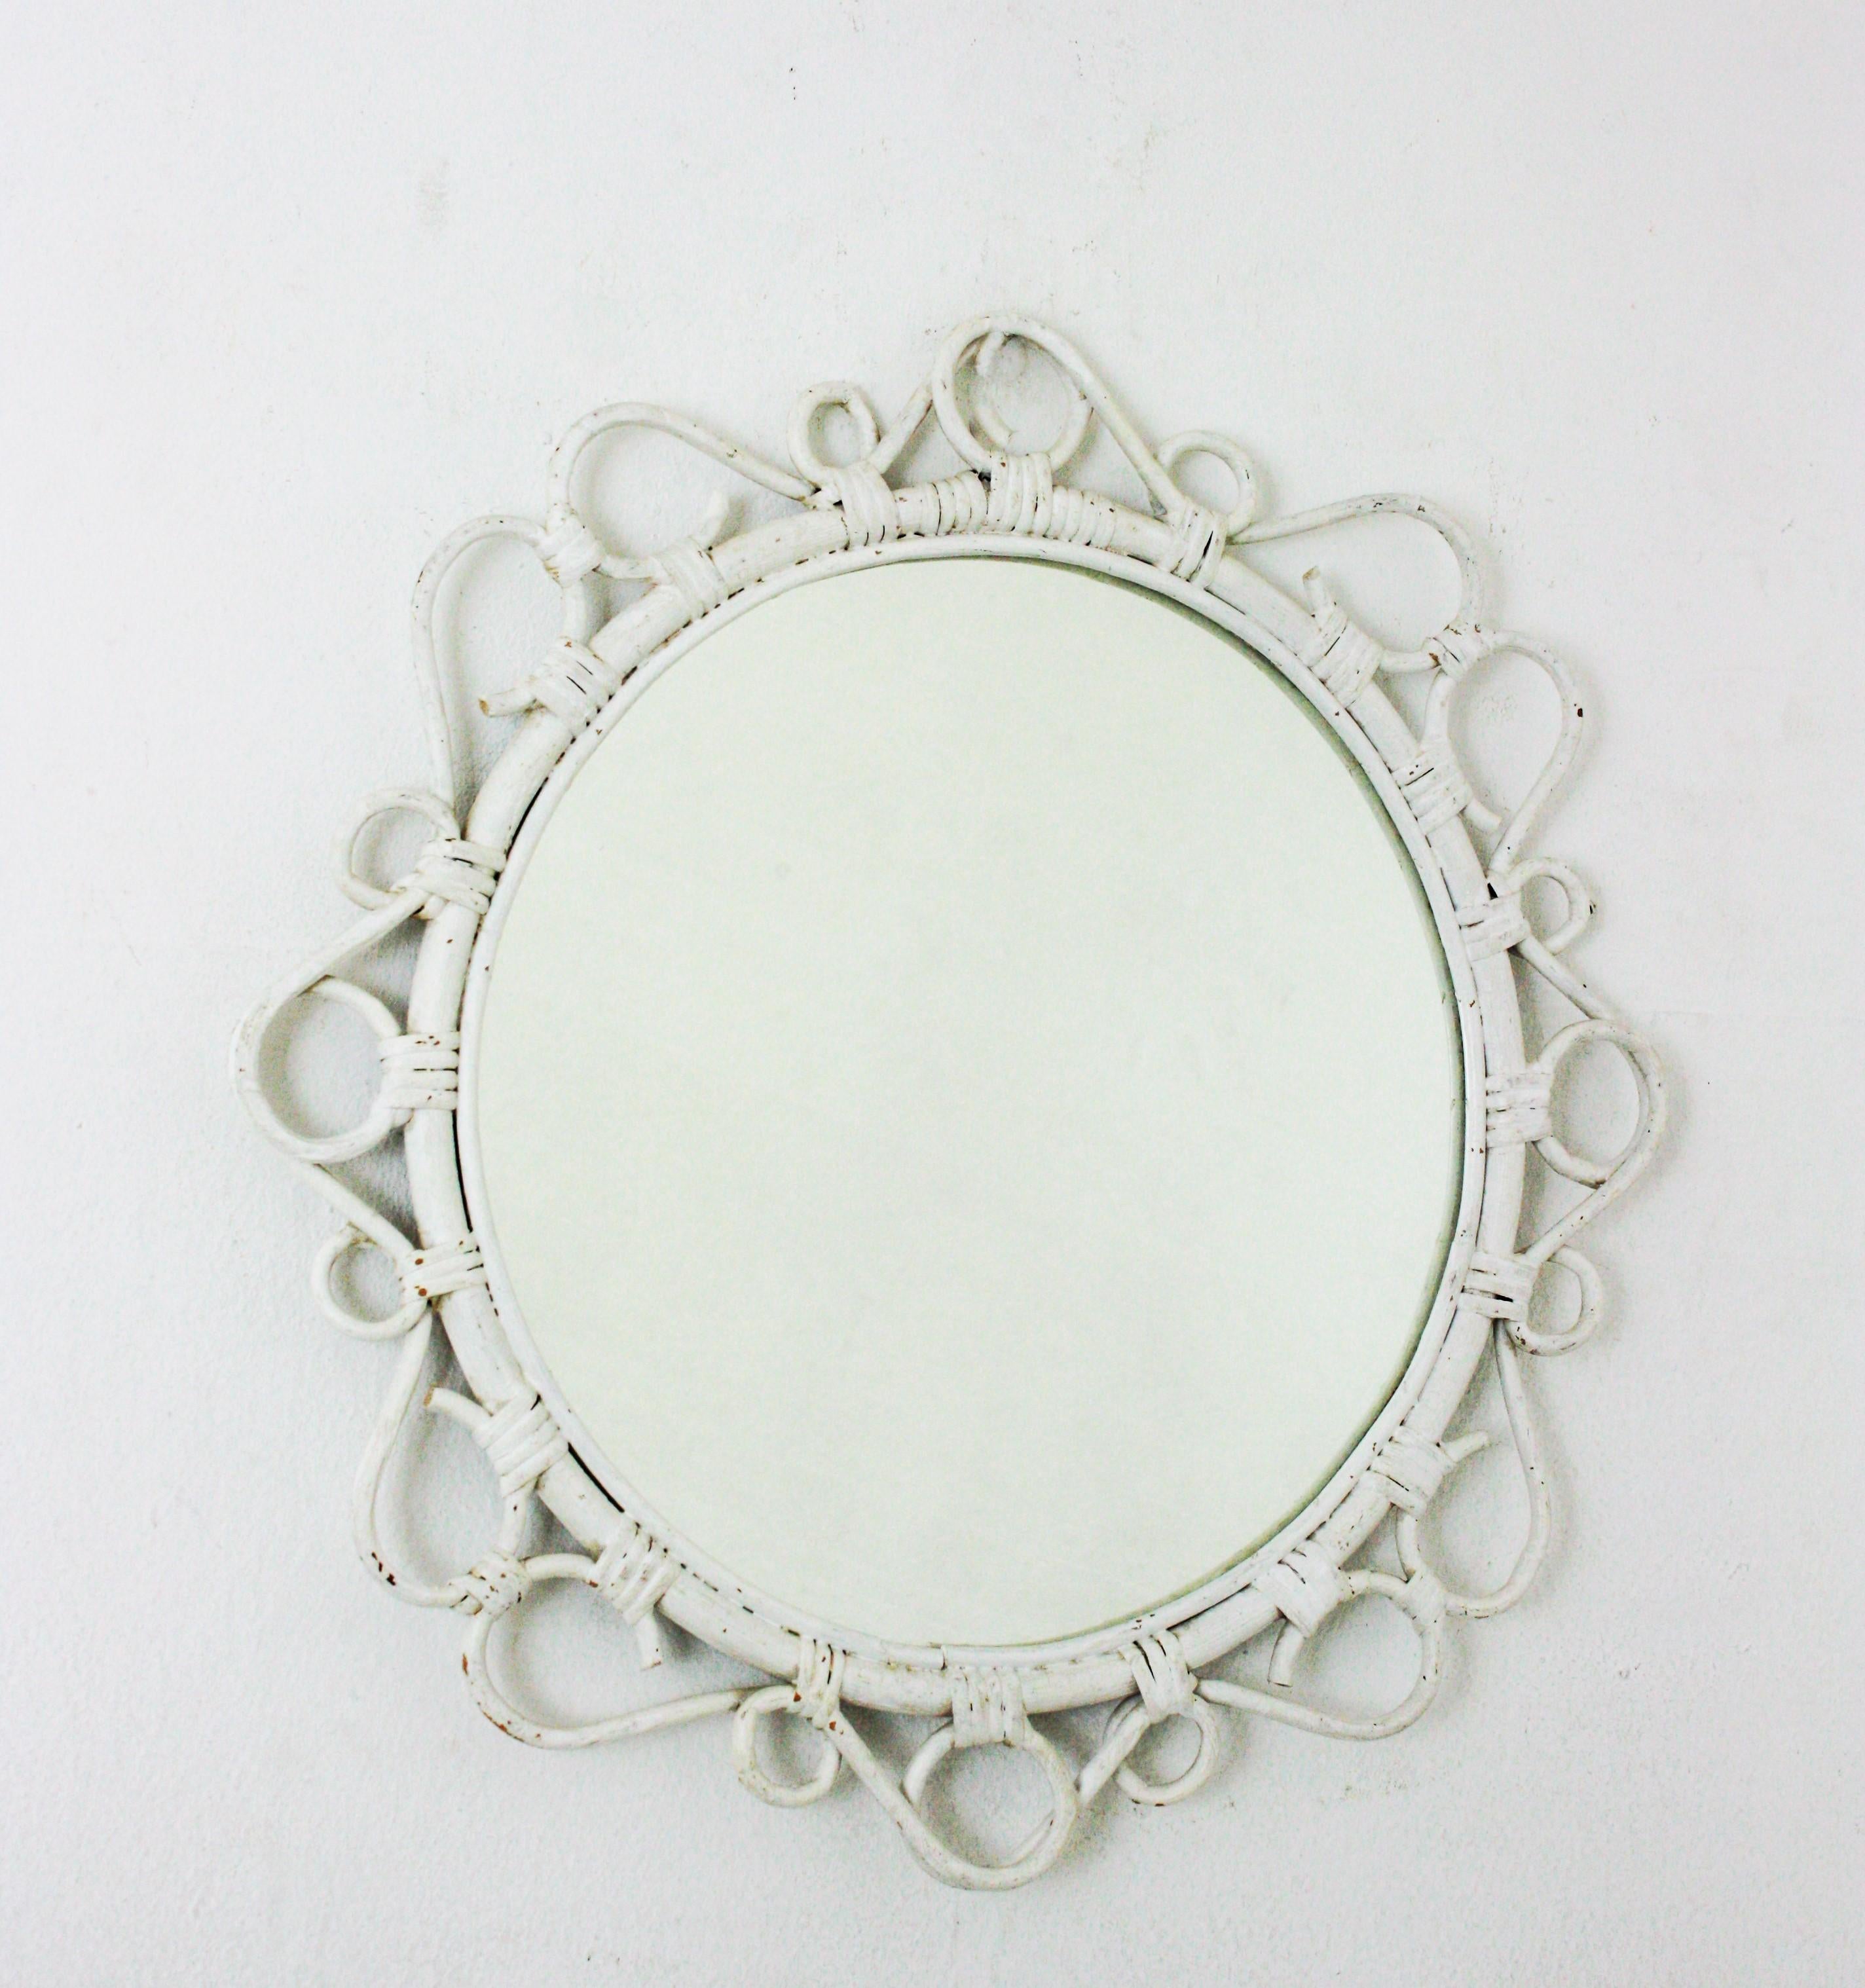 Handcrafted bamboo and rattan mirror patinated in white with scroll detailings surrounding the frame, Spain, 1960s. 
This Mediterranean wall mirror features a circular bamboo frame surrounded by rattan scroll and circle decorations.
Painted in